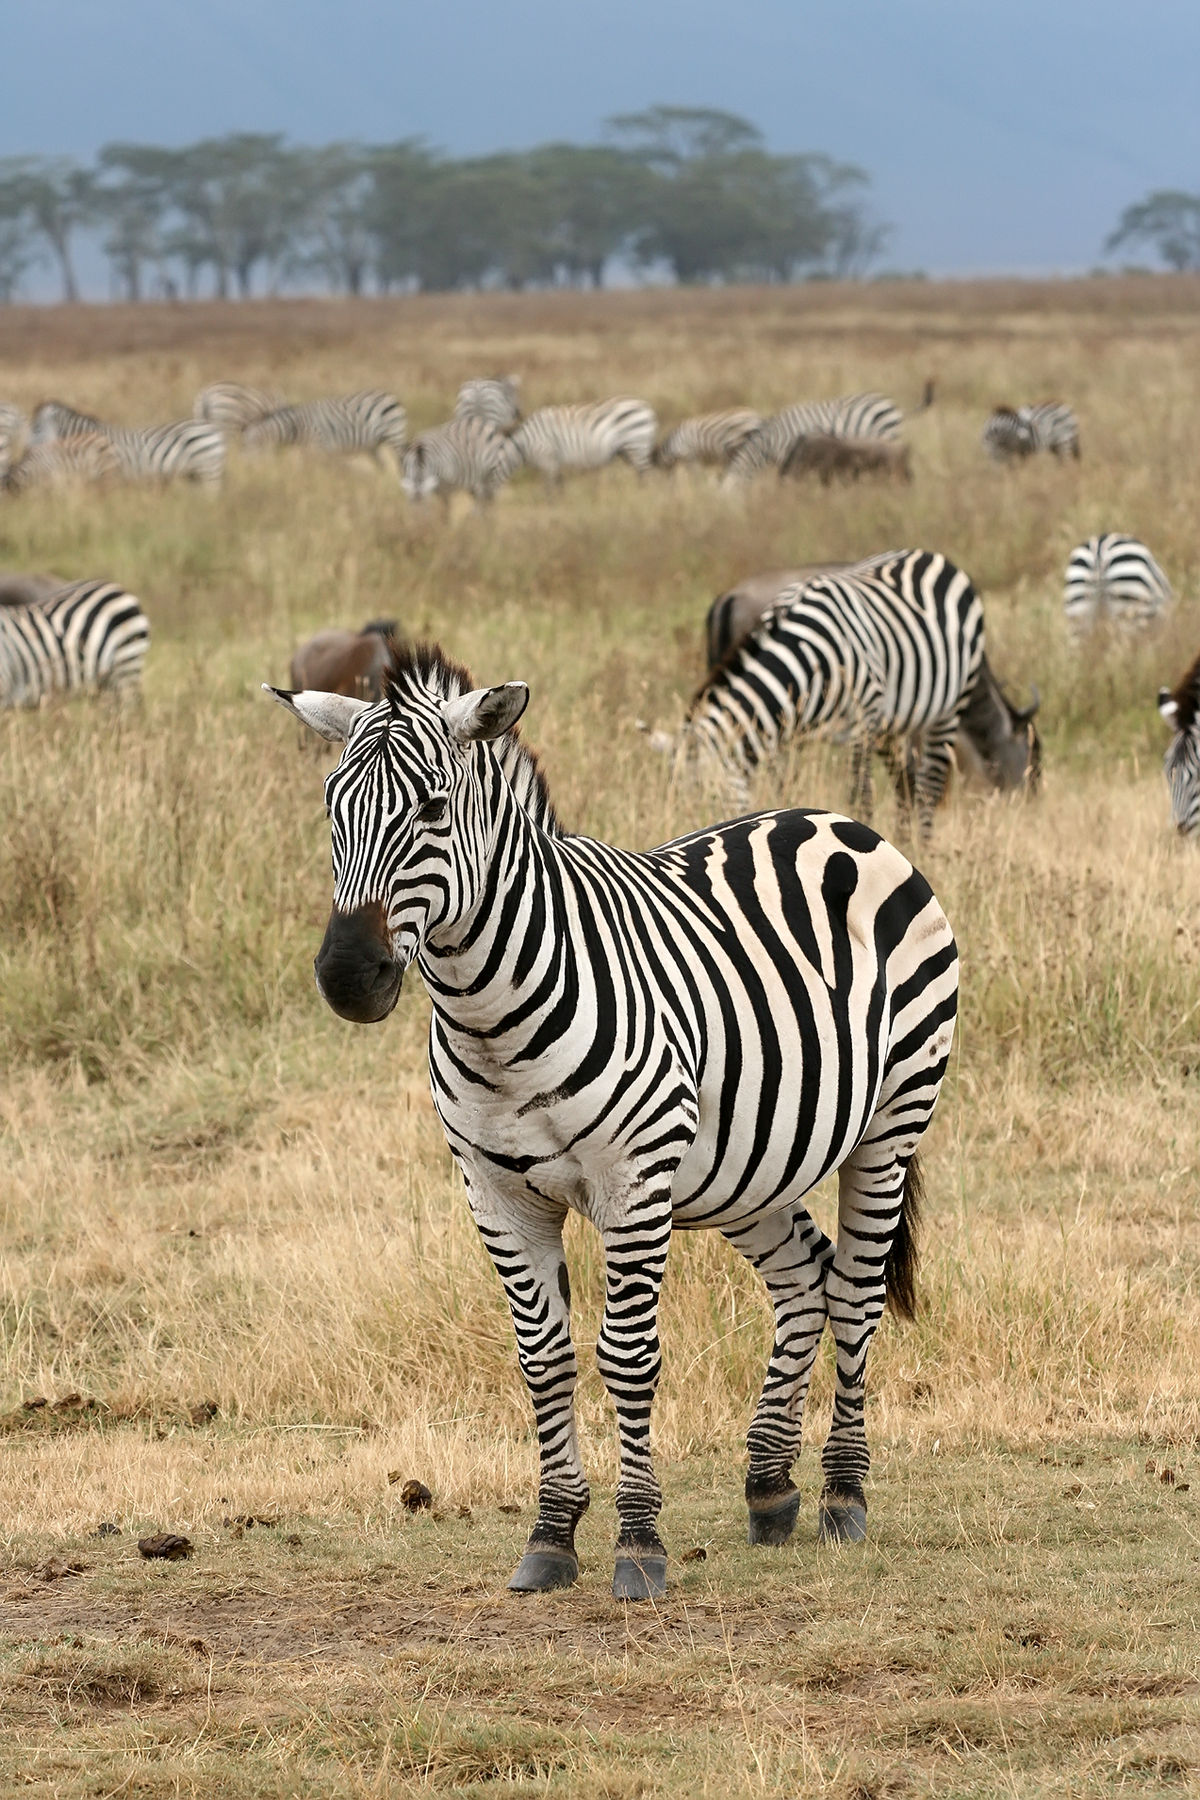 Are zezebras related to horses?